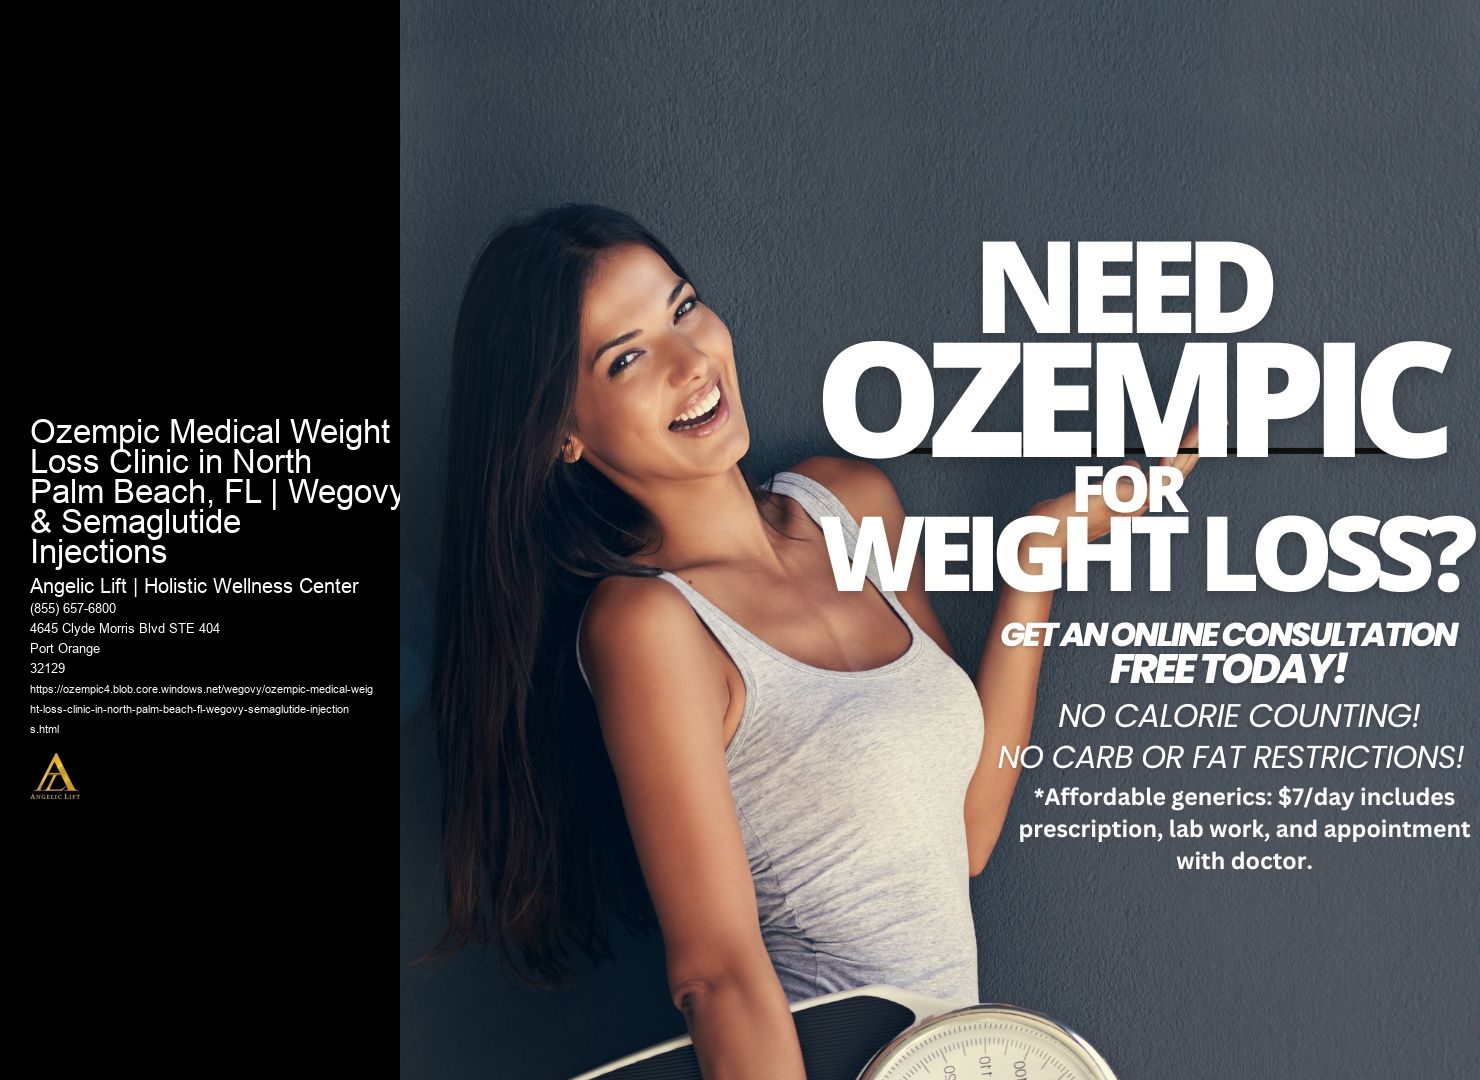 Ozempic Medical Weight Loss Clinic in North Palm Beach, FL | Wegovy & Semaglutide Injections